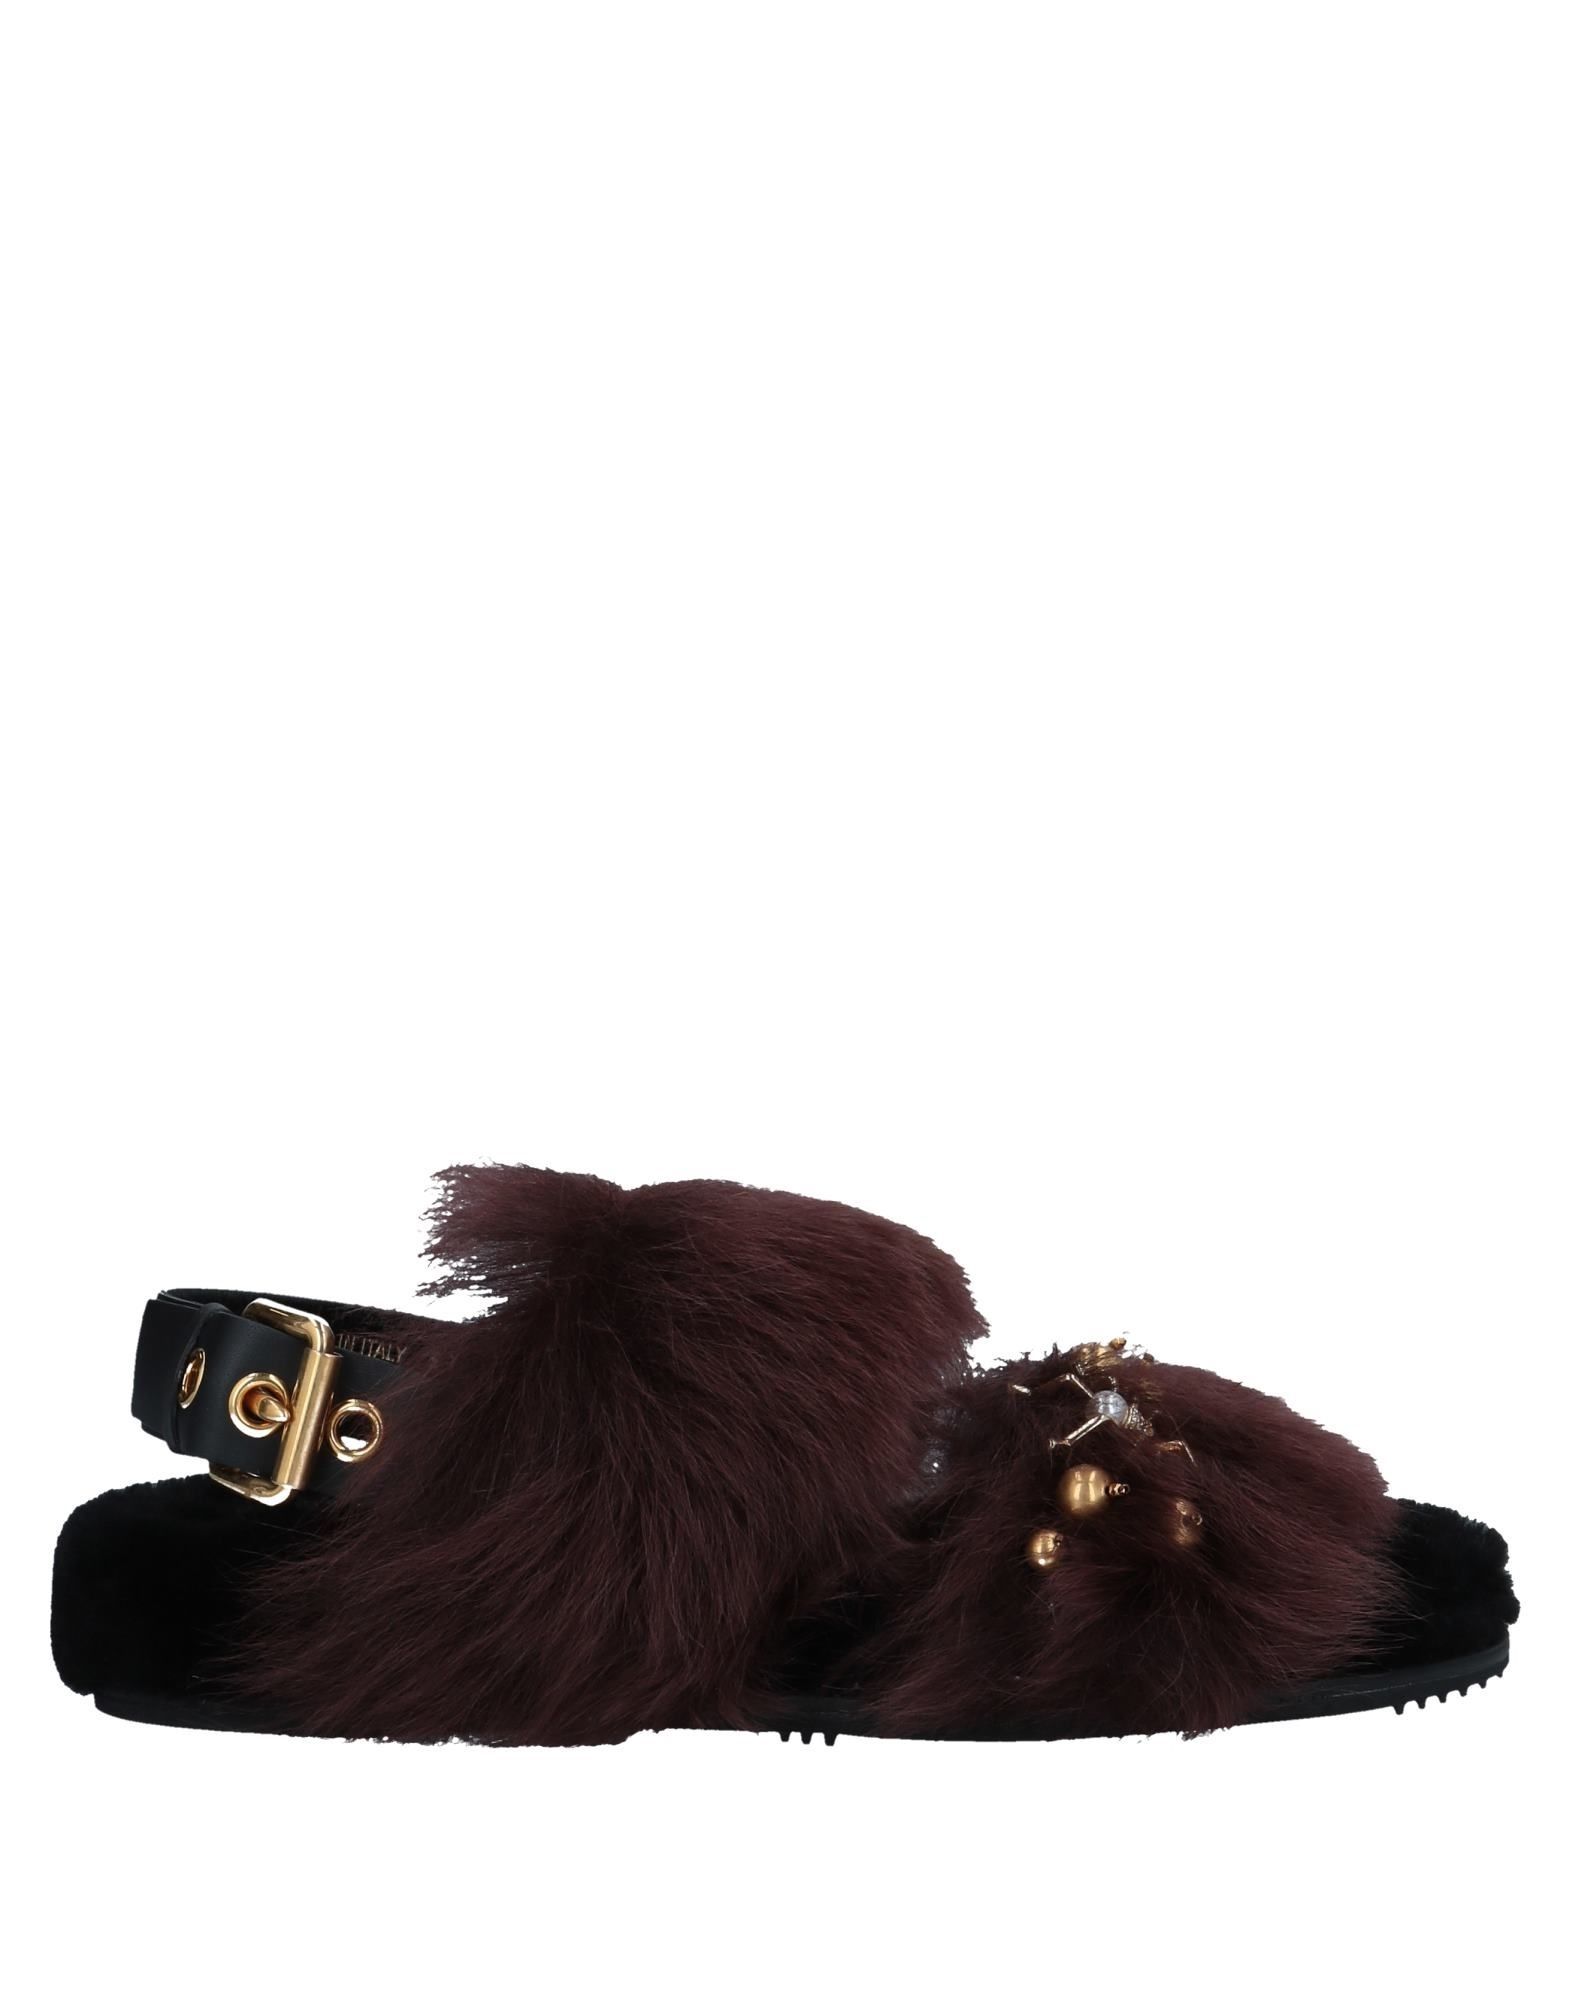 fur, beaded, metal applications, solid colour, buckling ankle strap closure, round toeline, flat, leather lining, rubber cleated sole, contains non-textile parts of animal origin